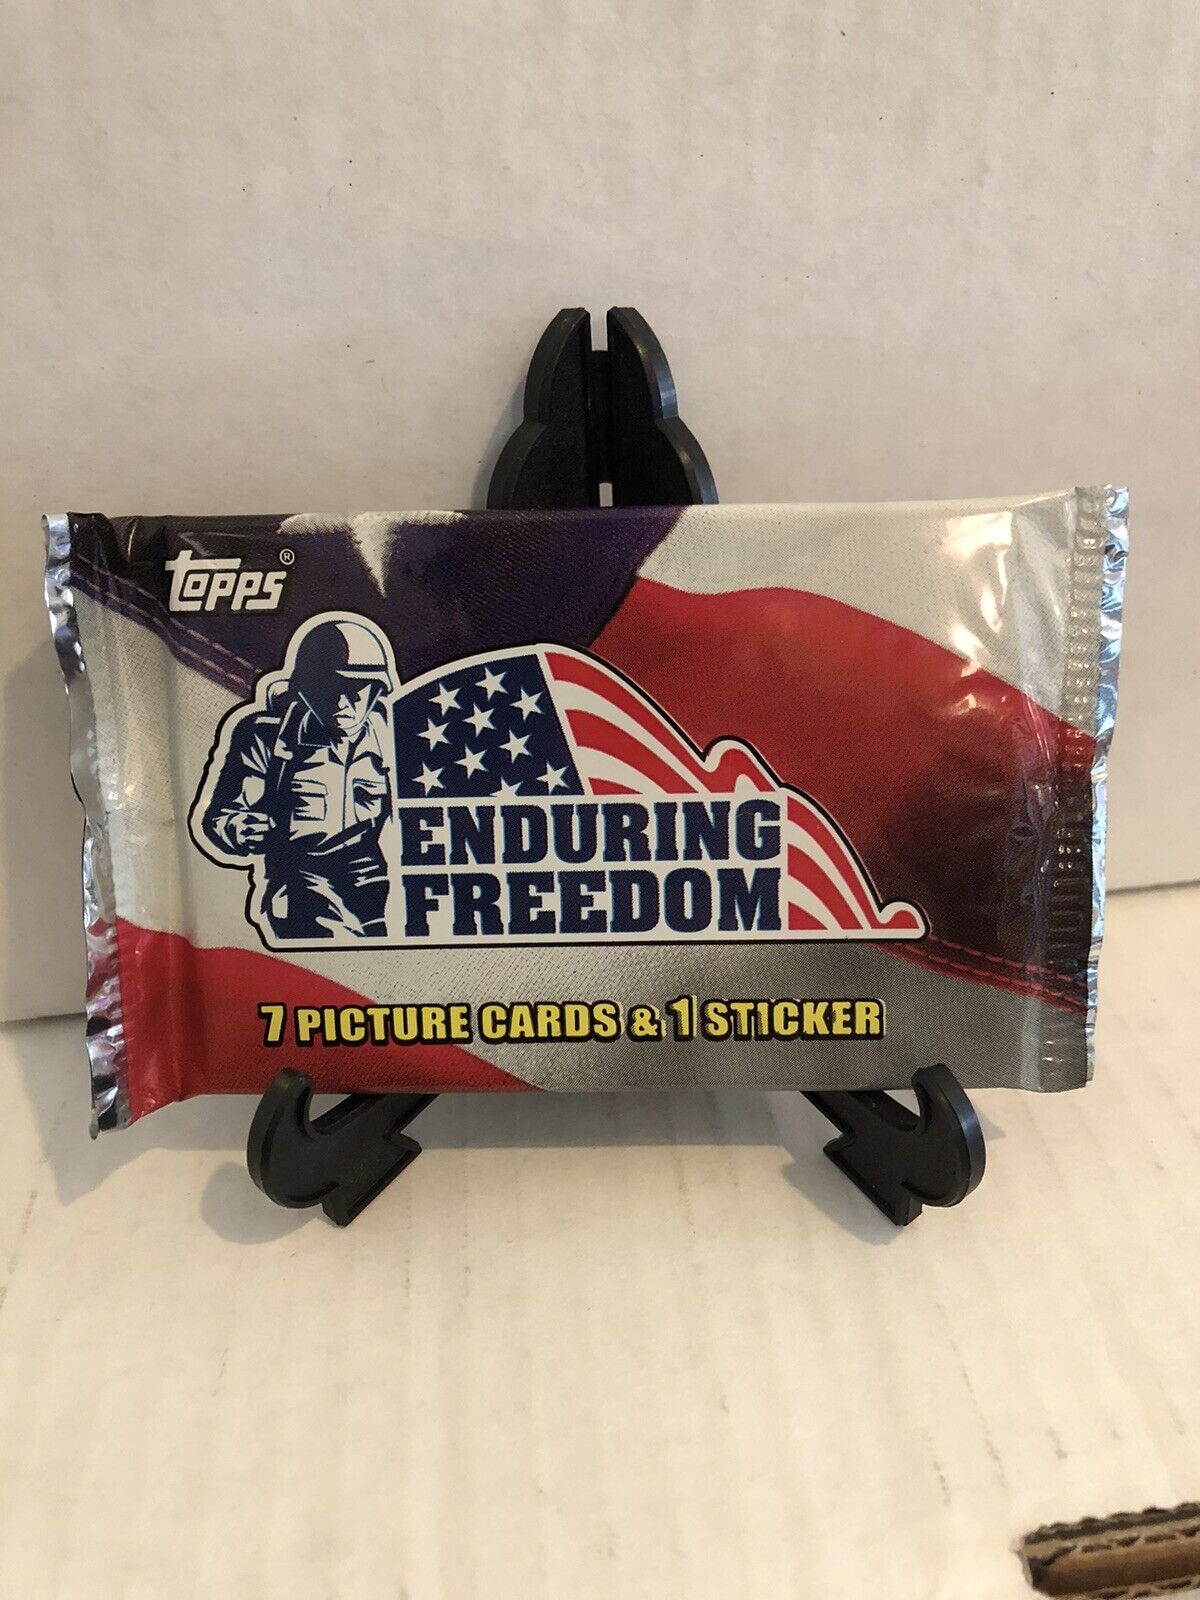 2001 Topps Enduring Freedom Sealed Trading Card Pack NEW USA Vintage Wax Pack